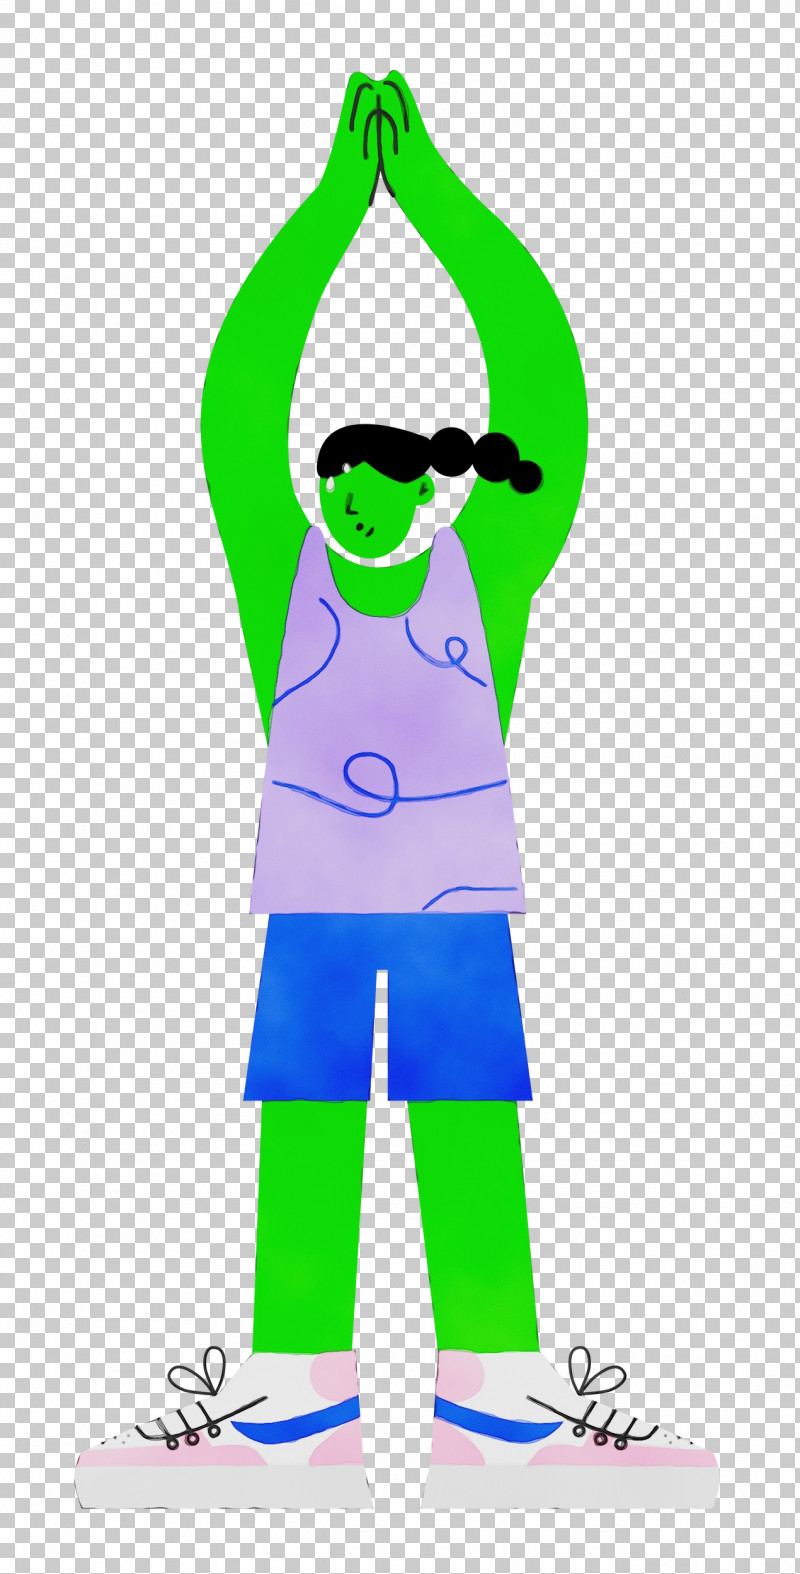 Sports Equipment Cartoon Character Outerwear / M Costume PNG, Clipart, Cartoon, Character, Costume, Equipment, Green Free PNG Download